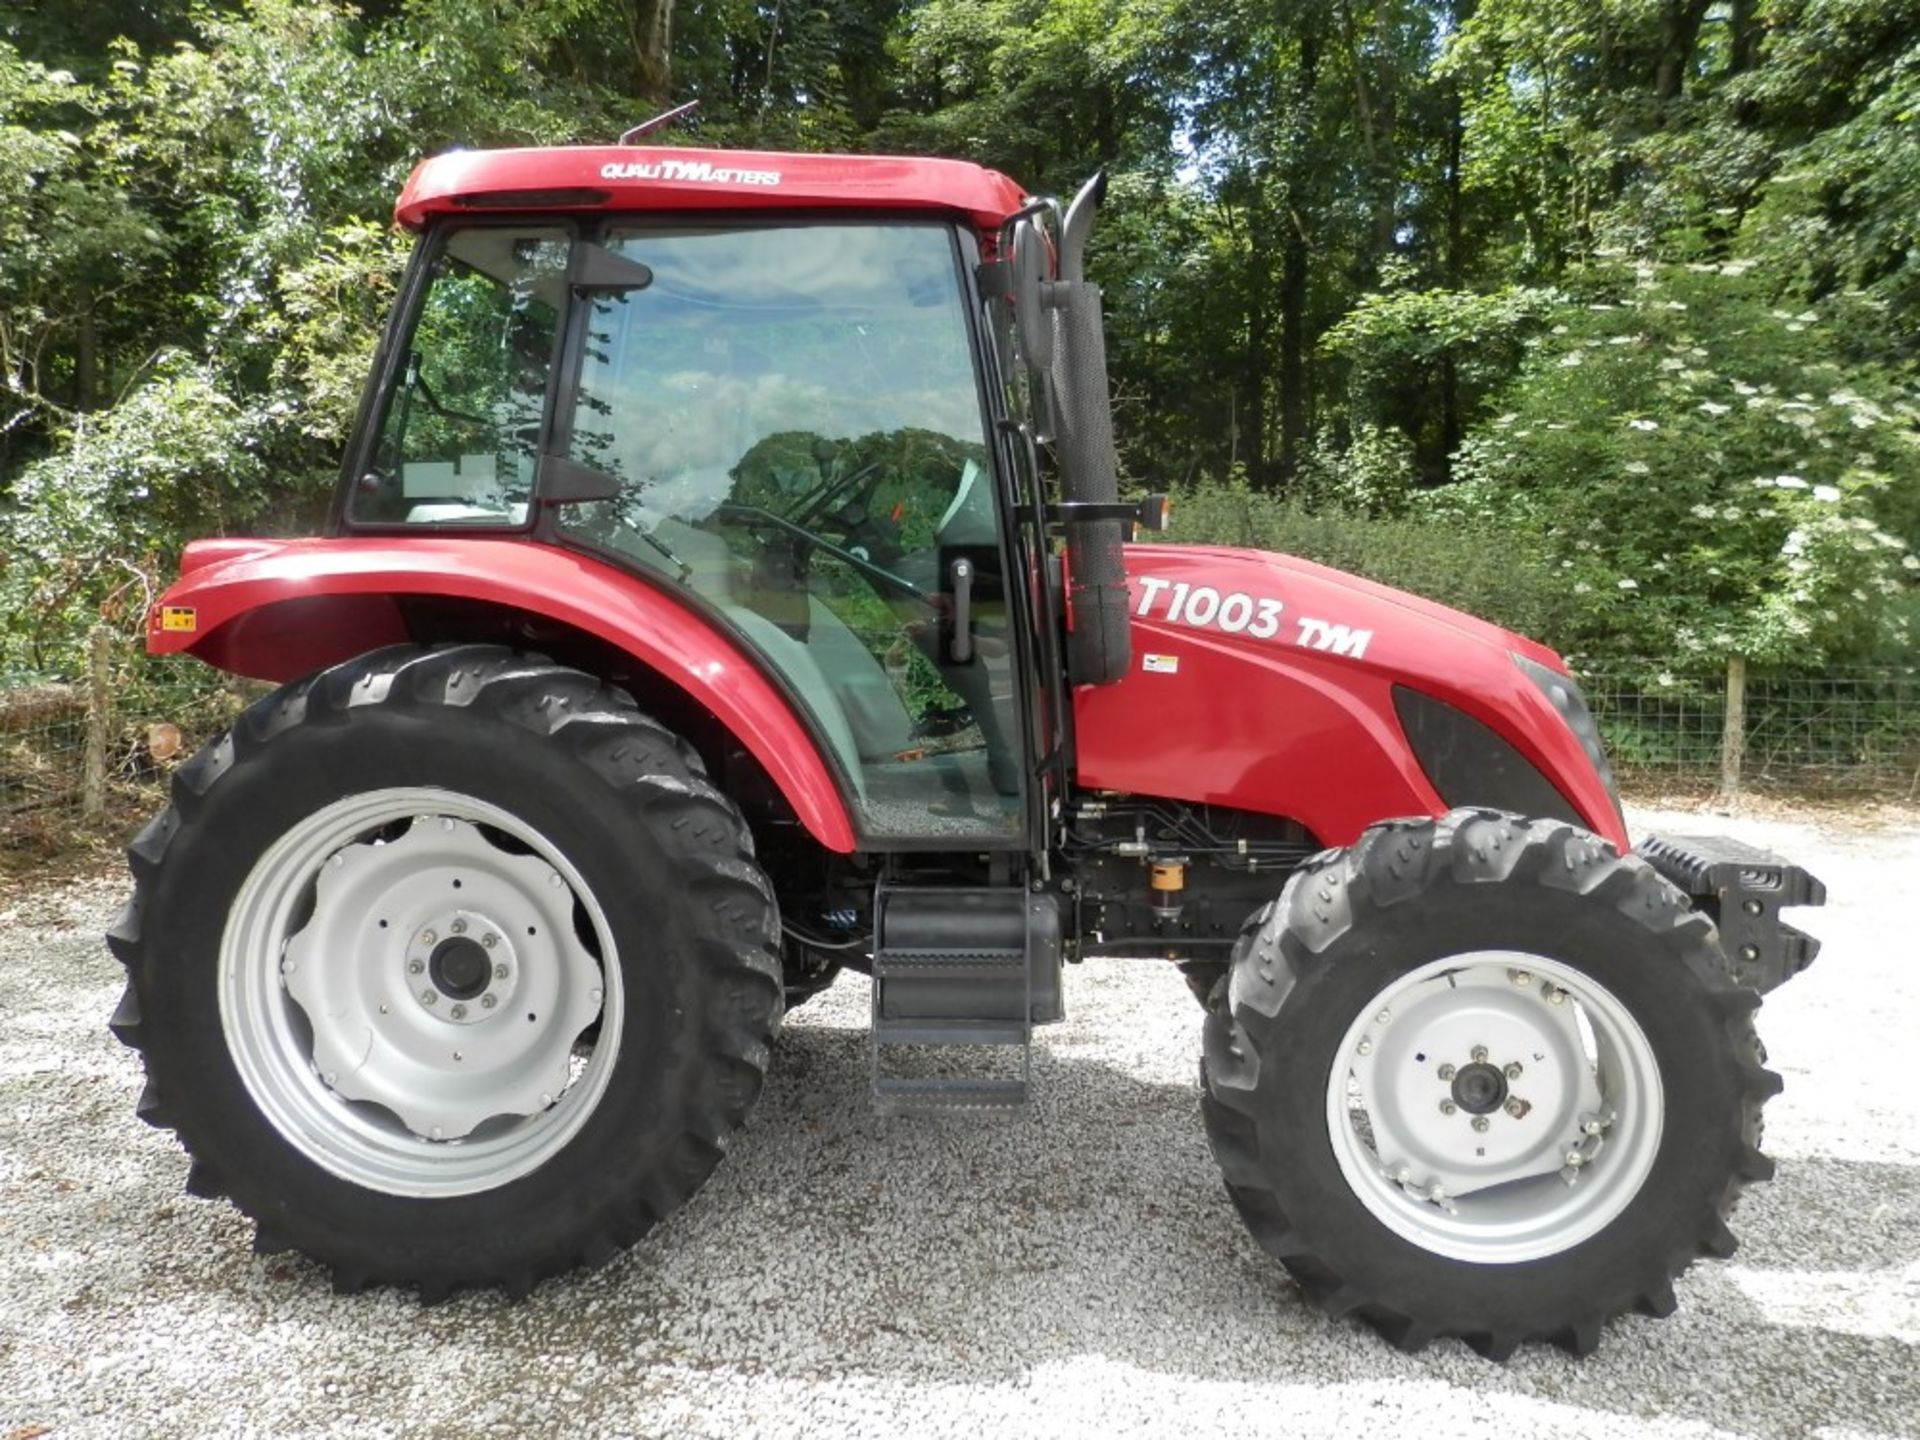 2012 TYM T1003 4wd Tractor c/w Power Shuttle, 40k, air con Hours: 1201 Reg. No. AE12 HTJ - Image 3 of 9